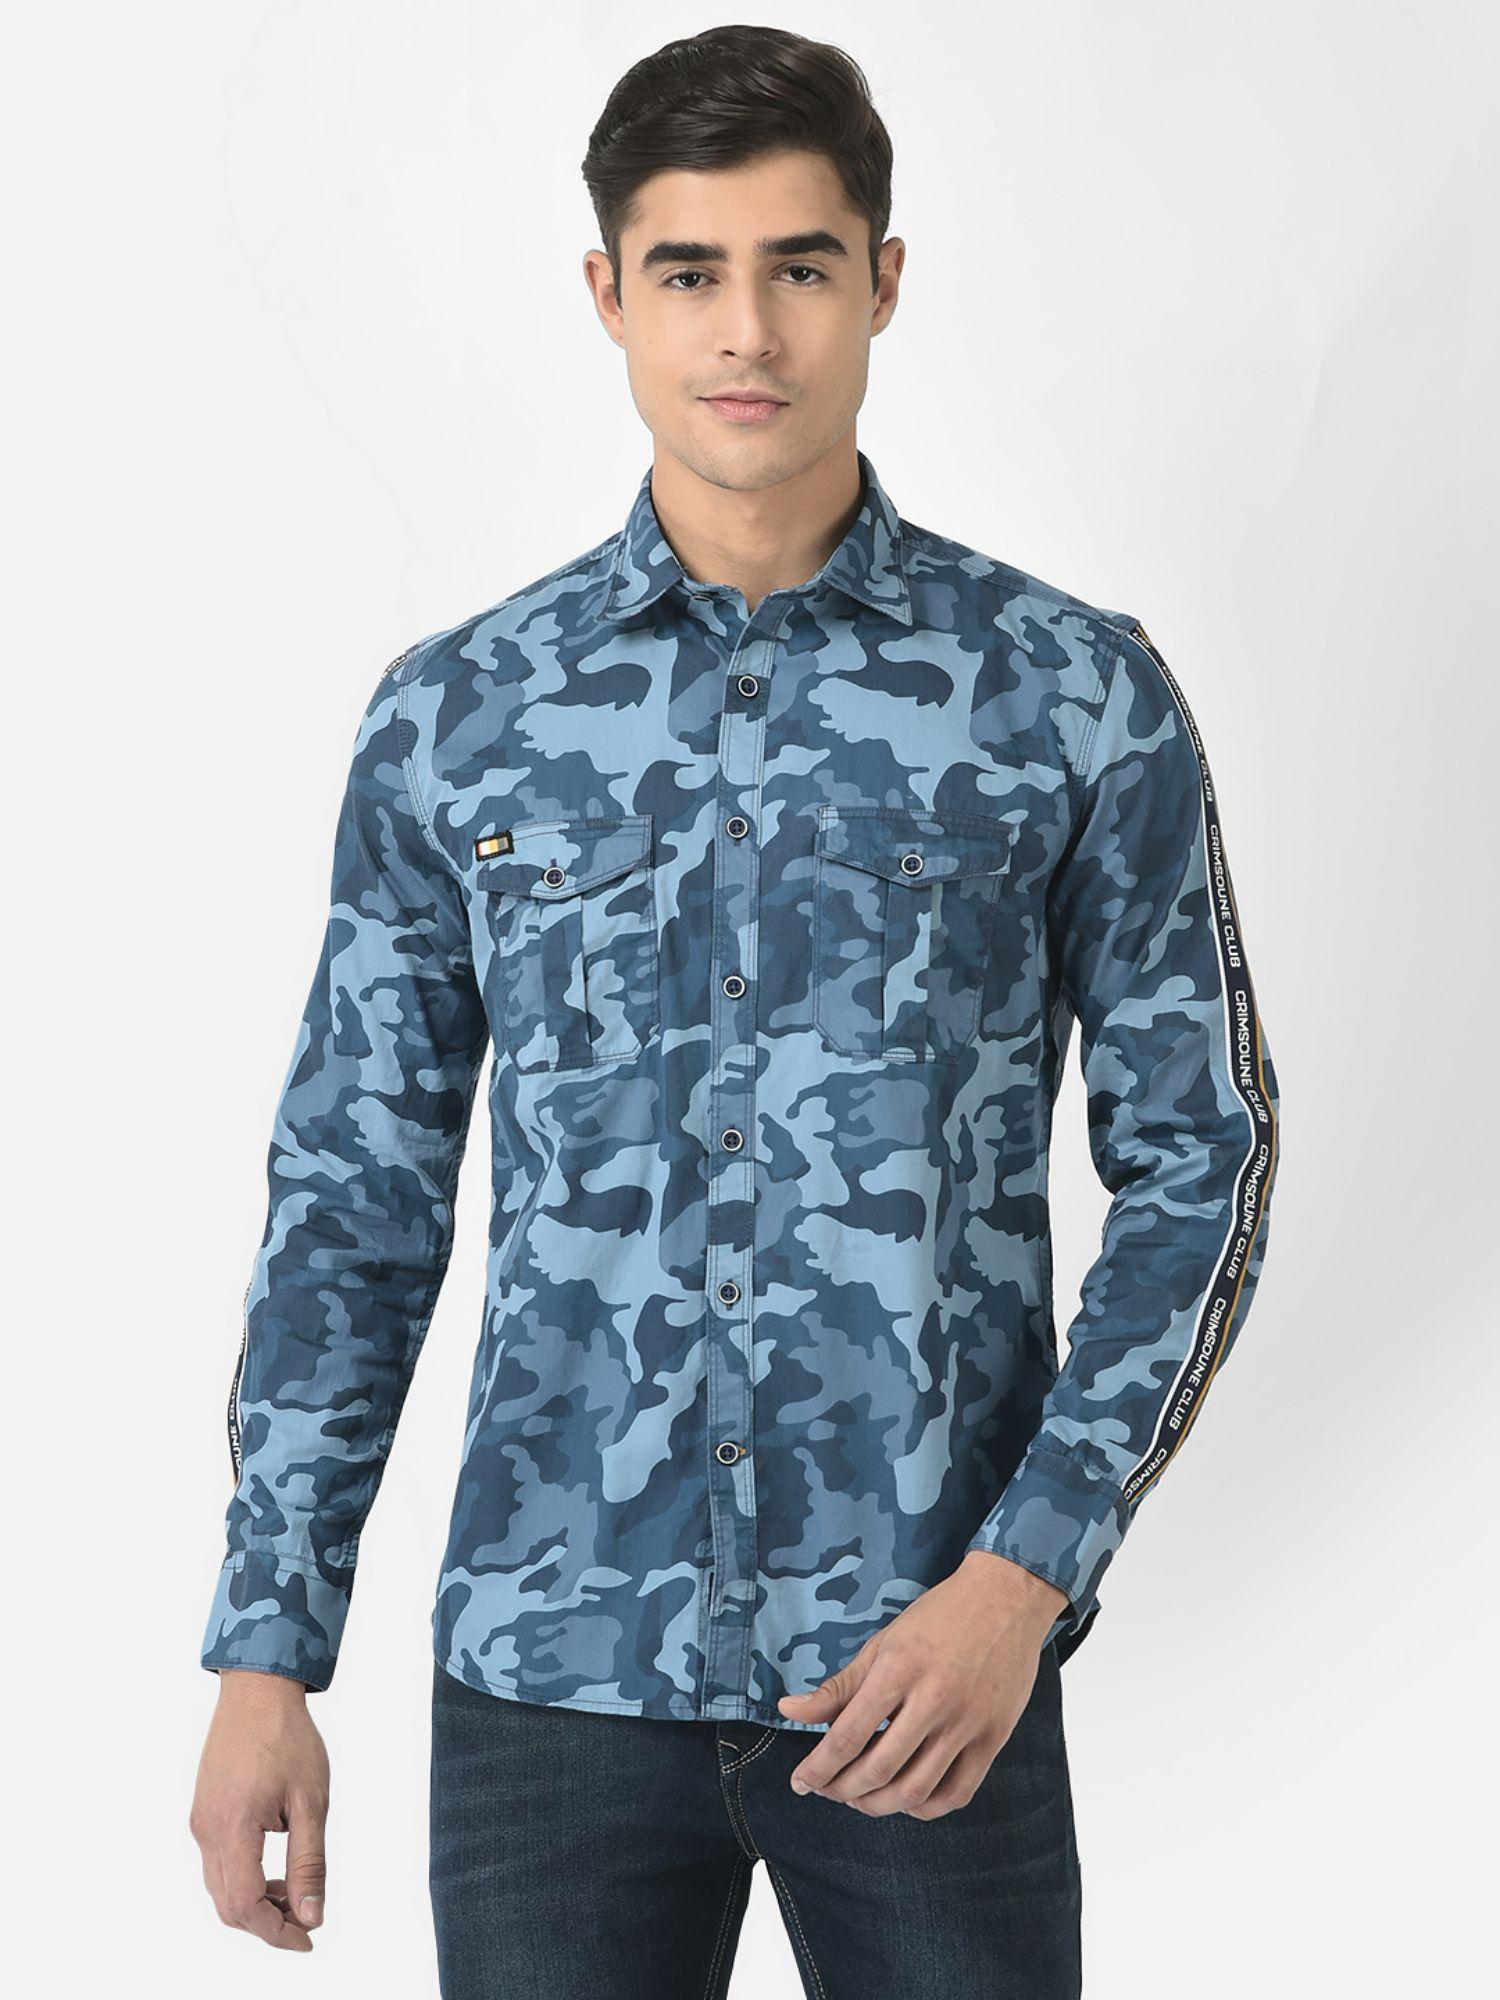 men-shirt-in-blue-camouflage-print